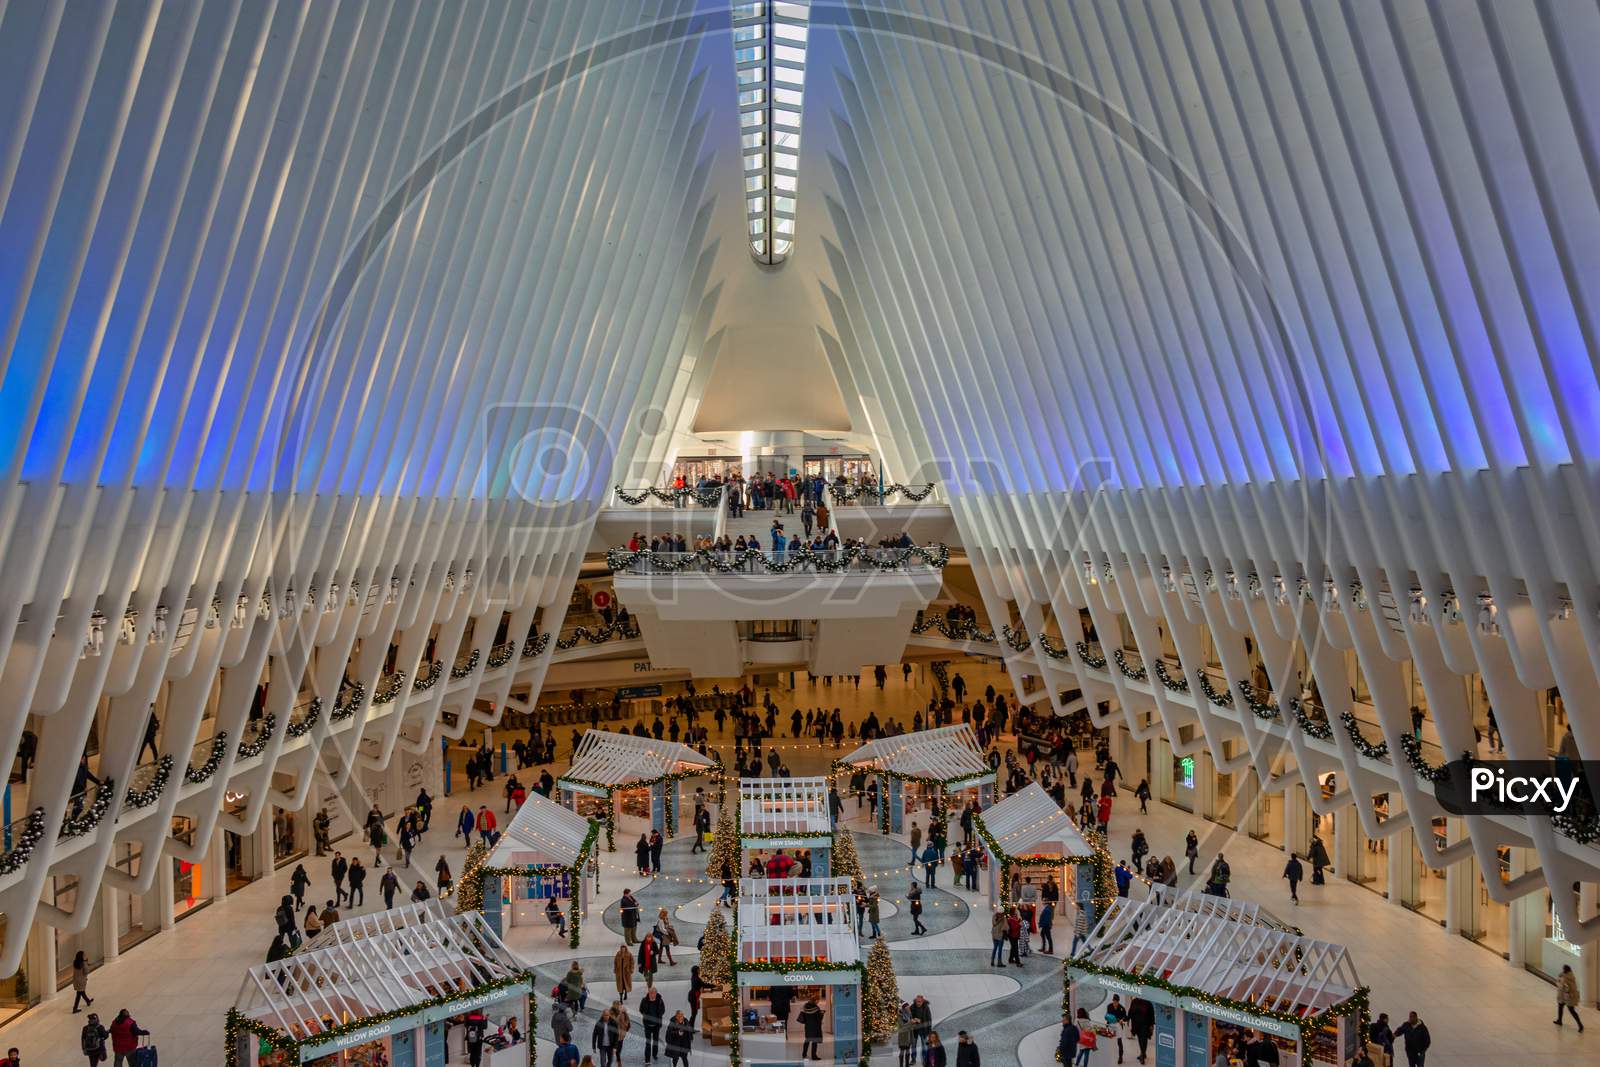 World Trade Center Transportation Hub ( Oculus)  in NYC Financial District from inside